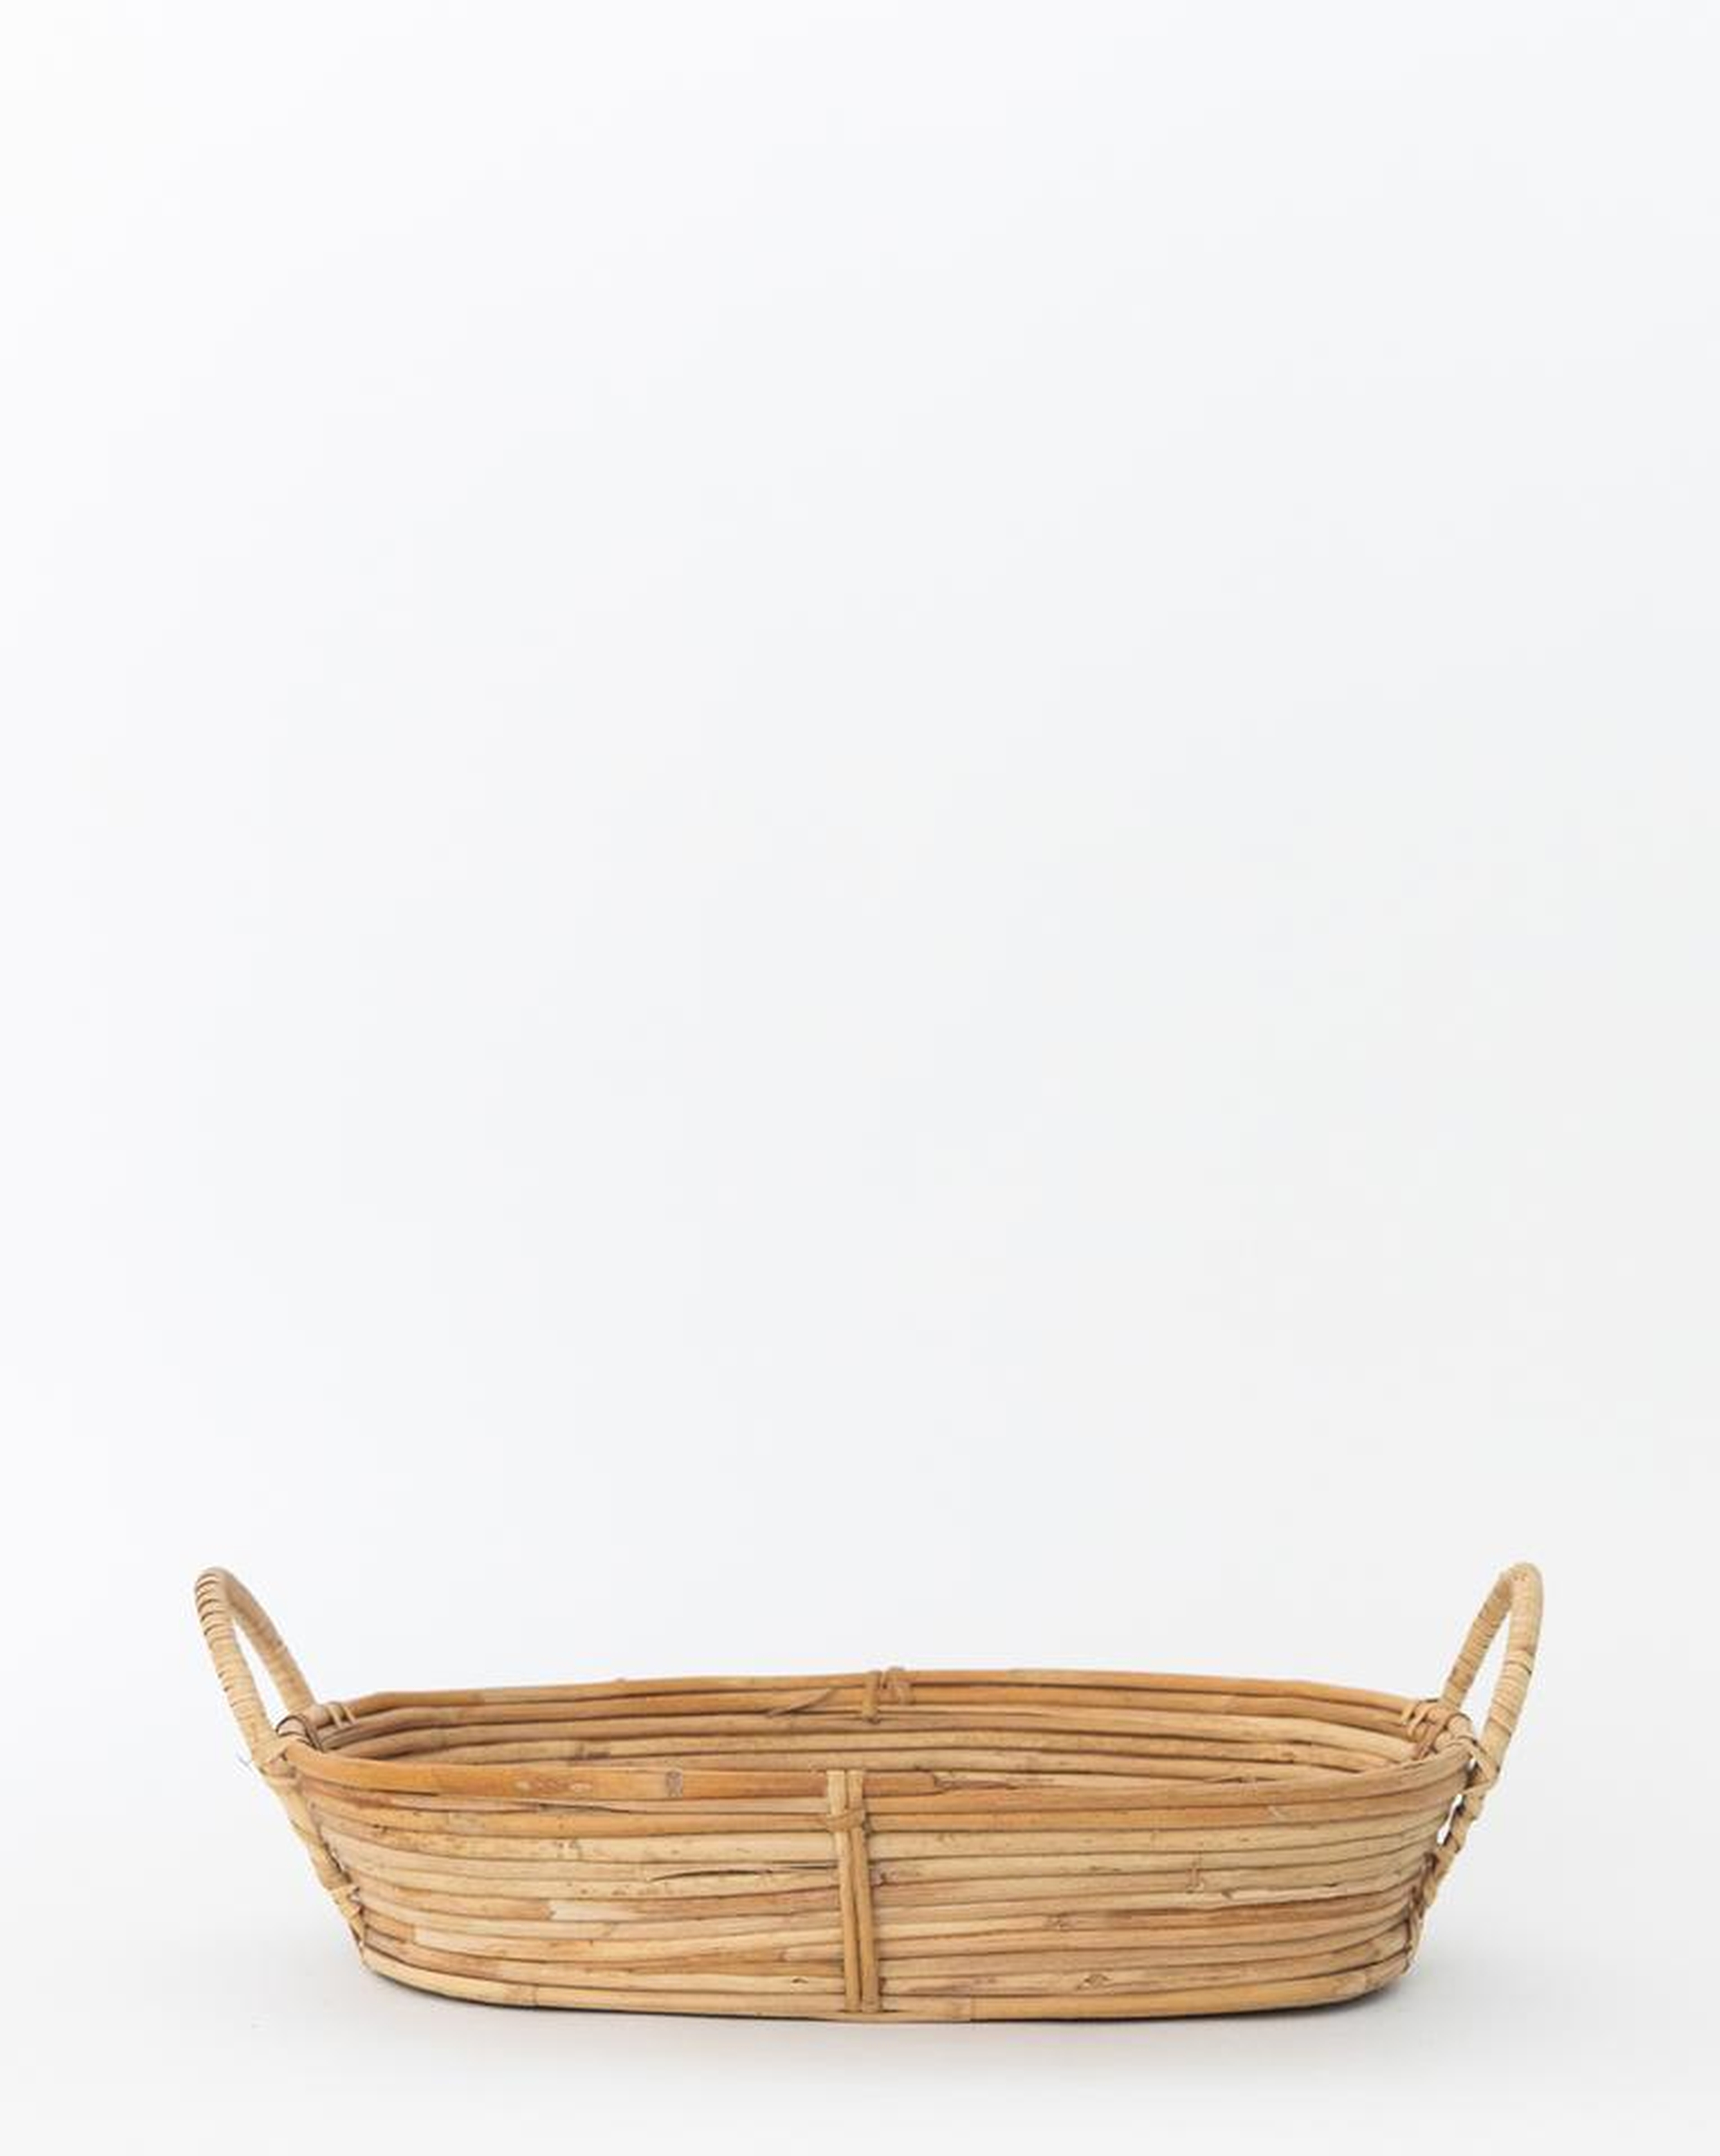 RATTAN CATCH-ALL BASKET - small - McGee & Co.